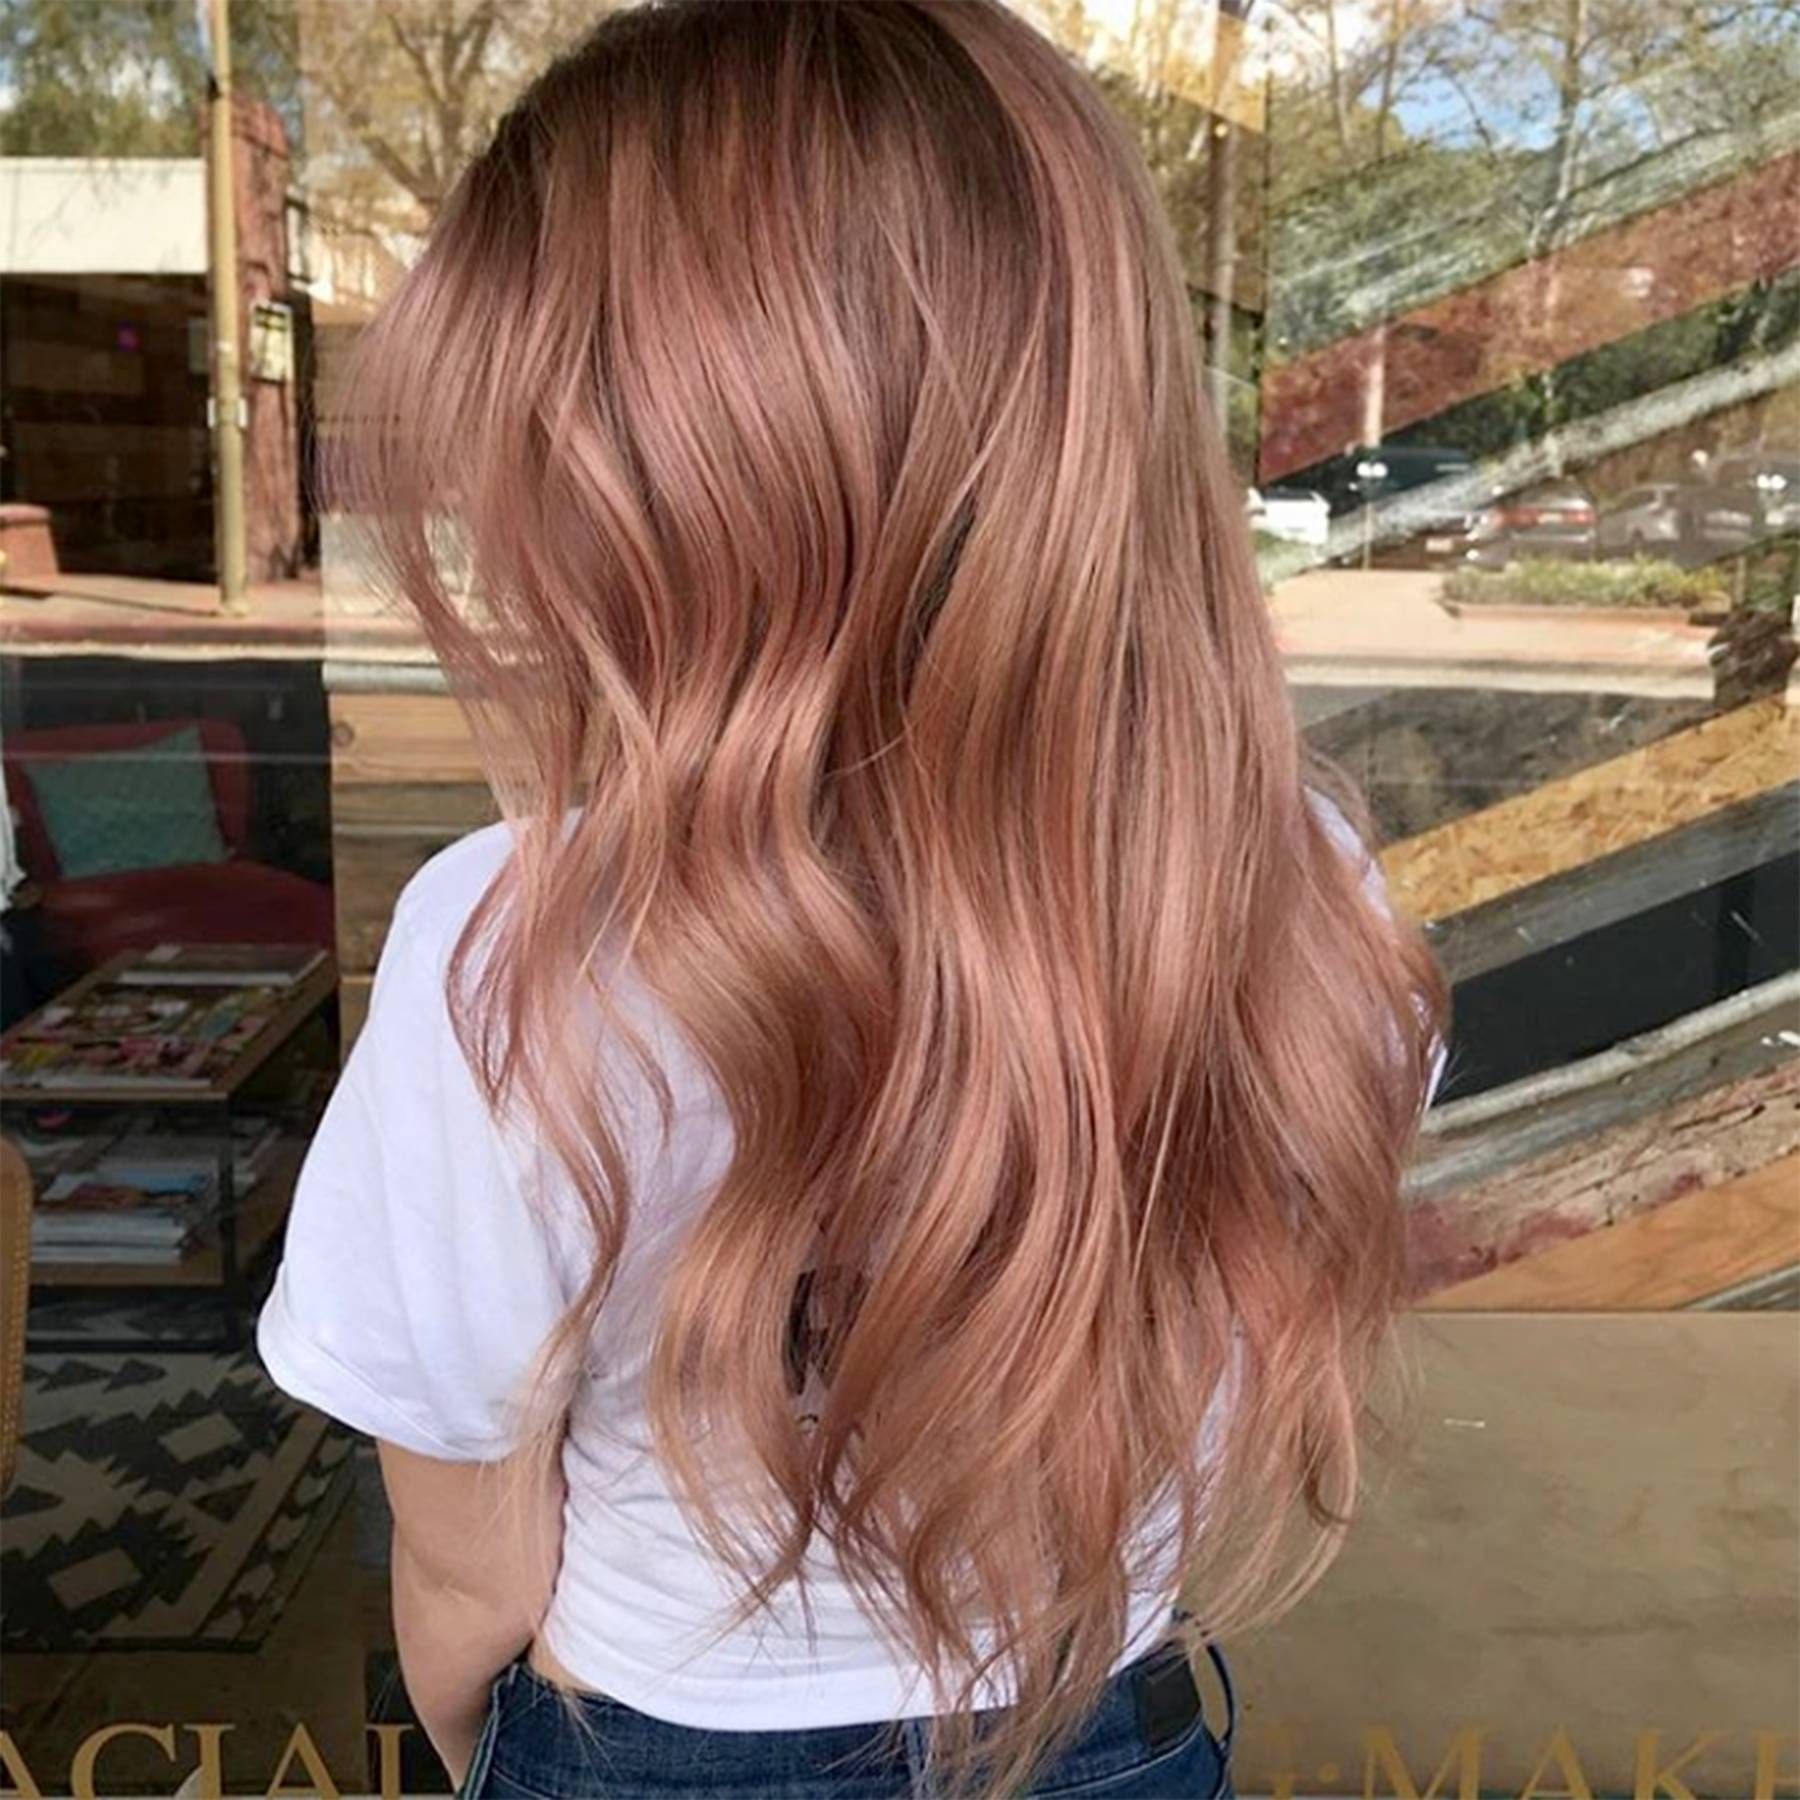 This is why you absolutely should dye your hair rose gold in lockdown -   19 hair Rose Gold pixie ideas